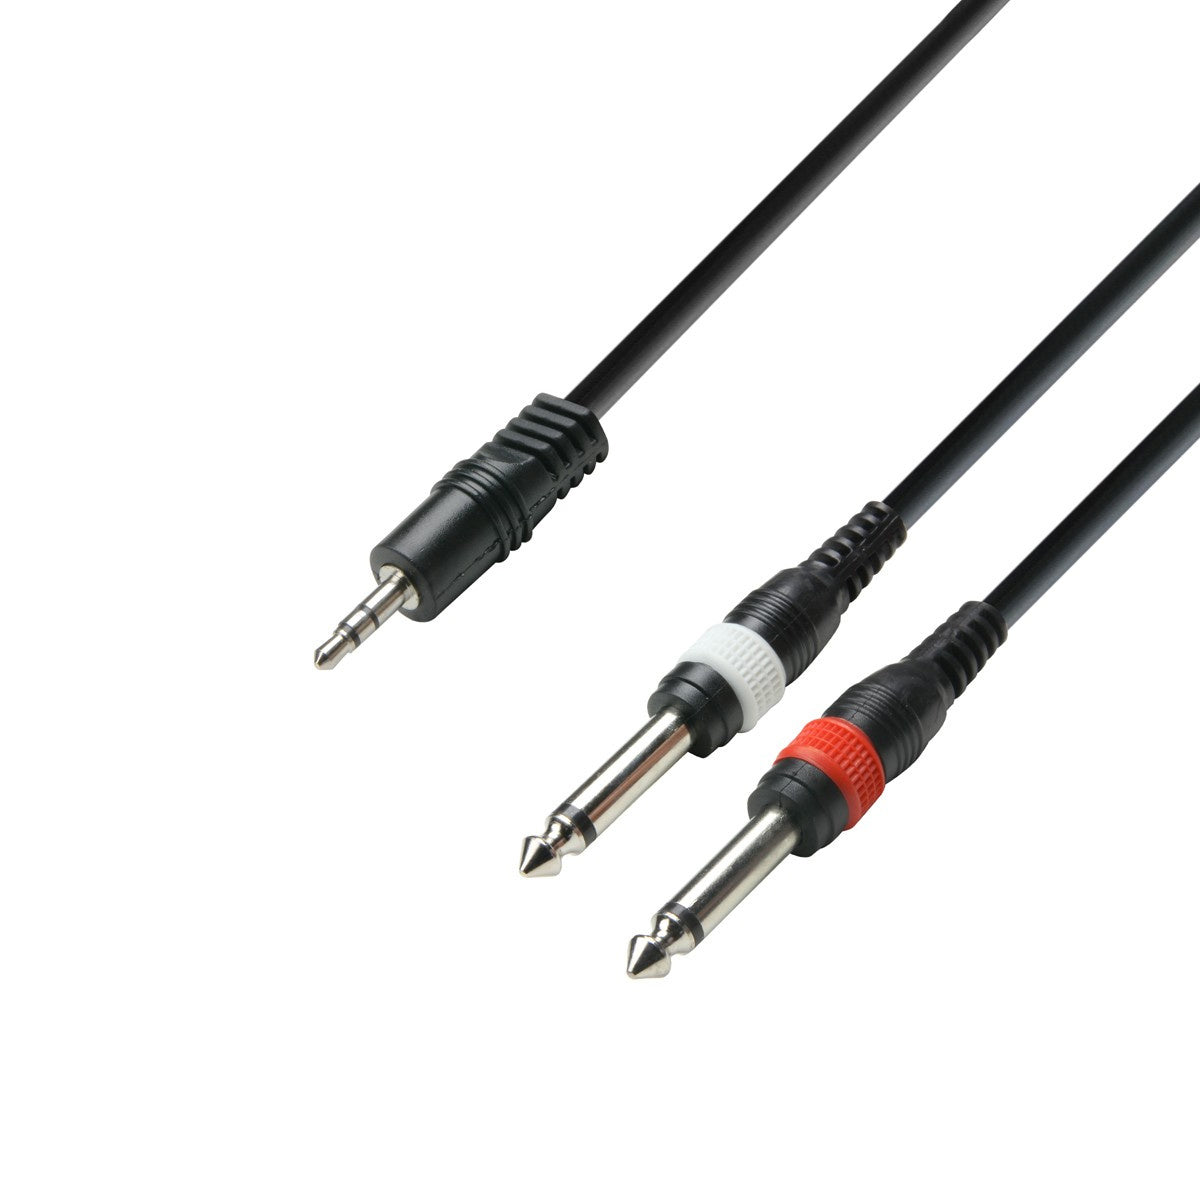 Adam Hall Cables K3 YWPP 0600 - Audio Cable 3.5mm Jack stereo to 2 x 6.3mm Jack mono 6m